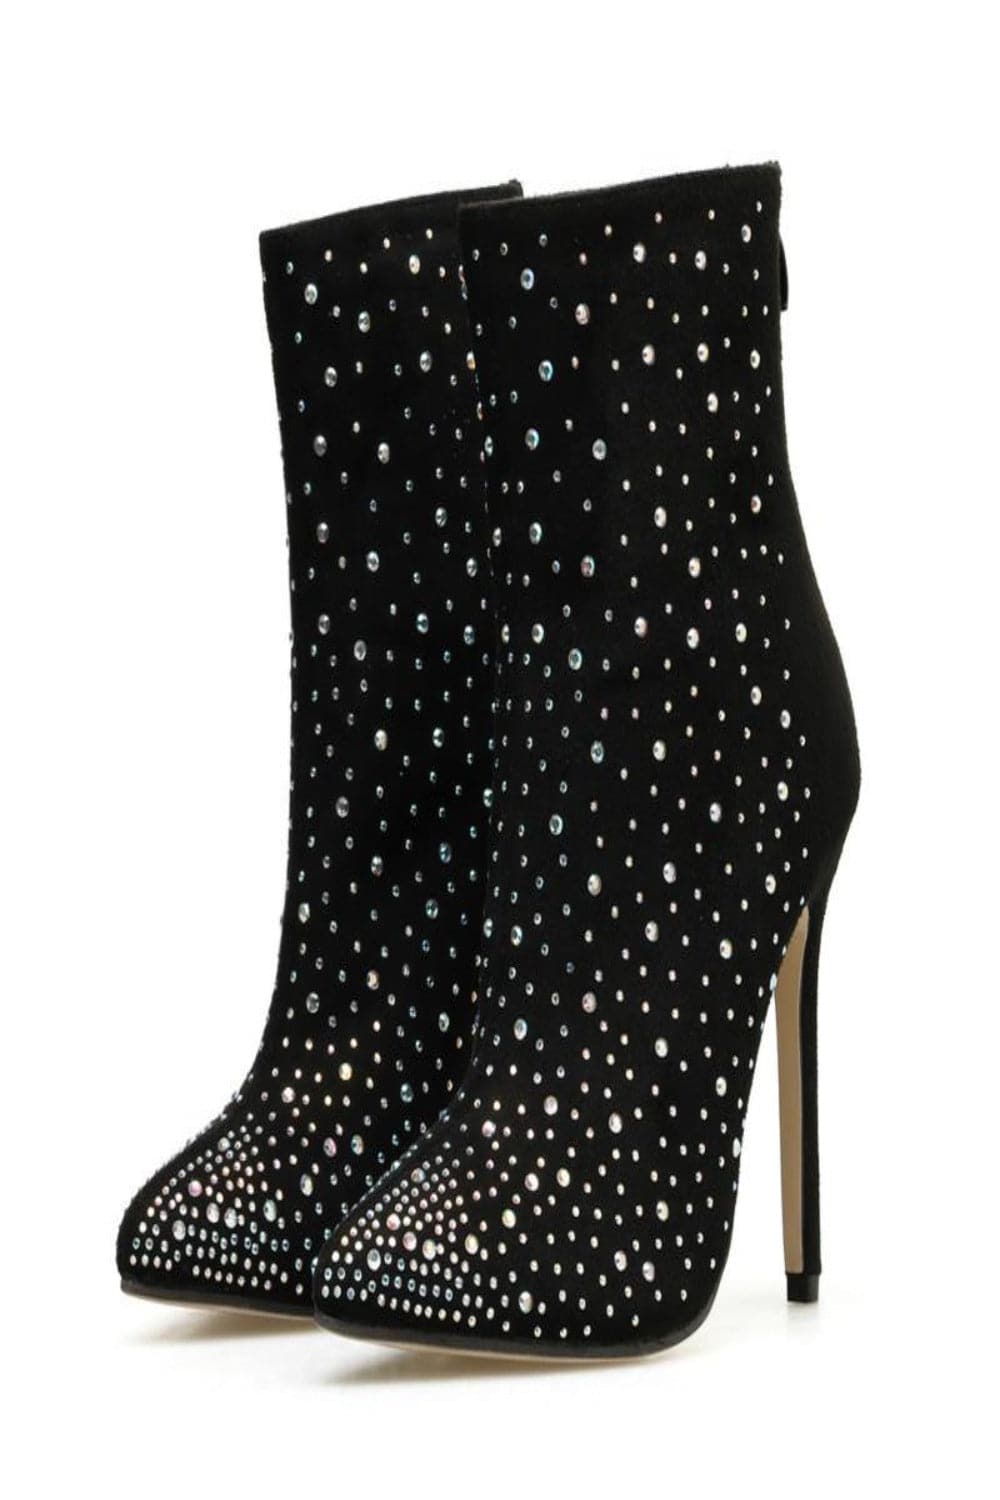 Black Stiletto Heel Pointed Toe Booties Rhinestone Ankle Boots - TGC Boutique - Ankle Booties